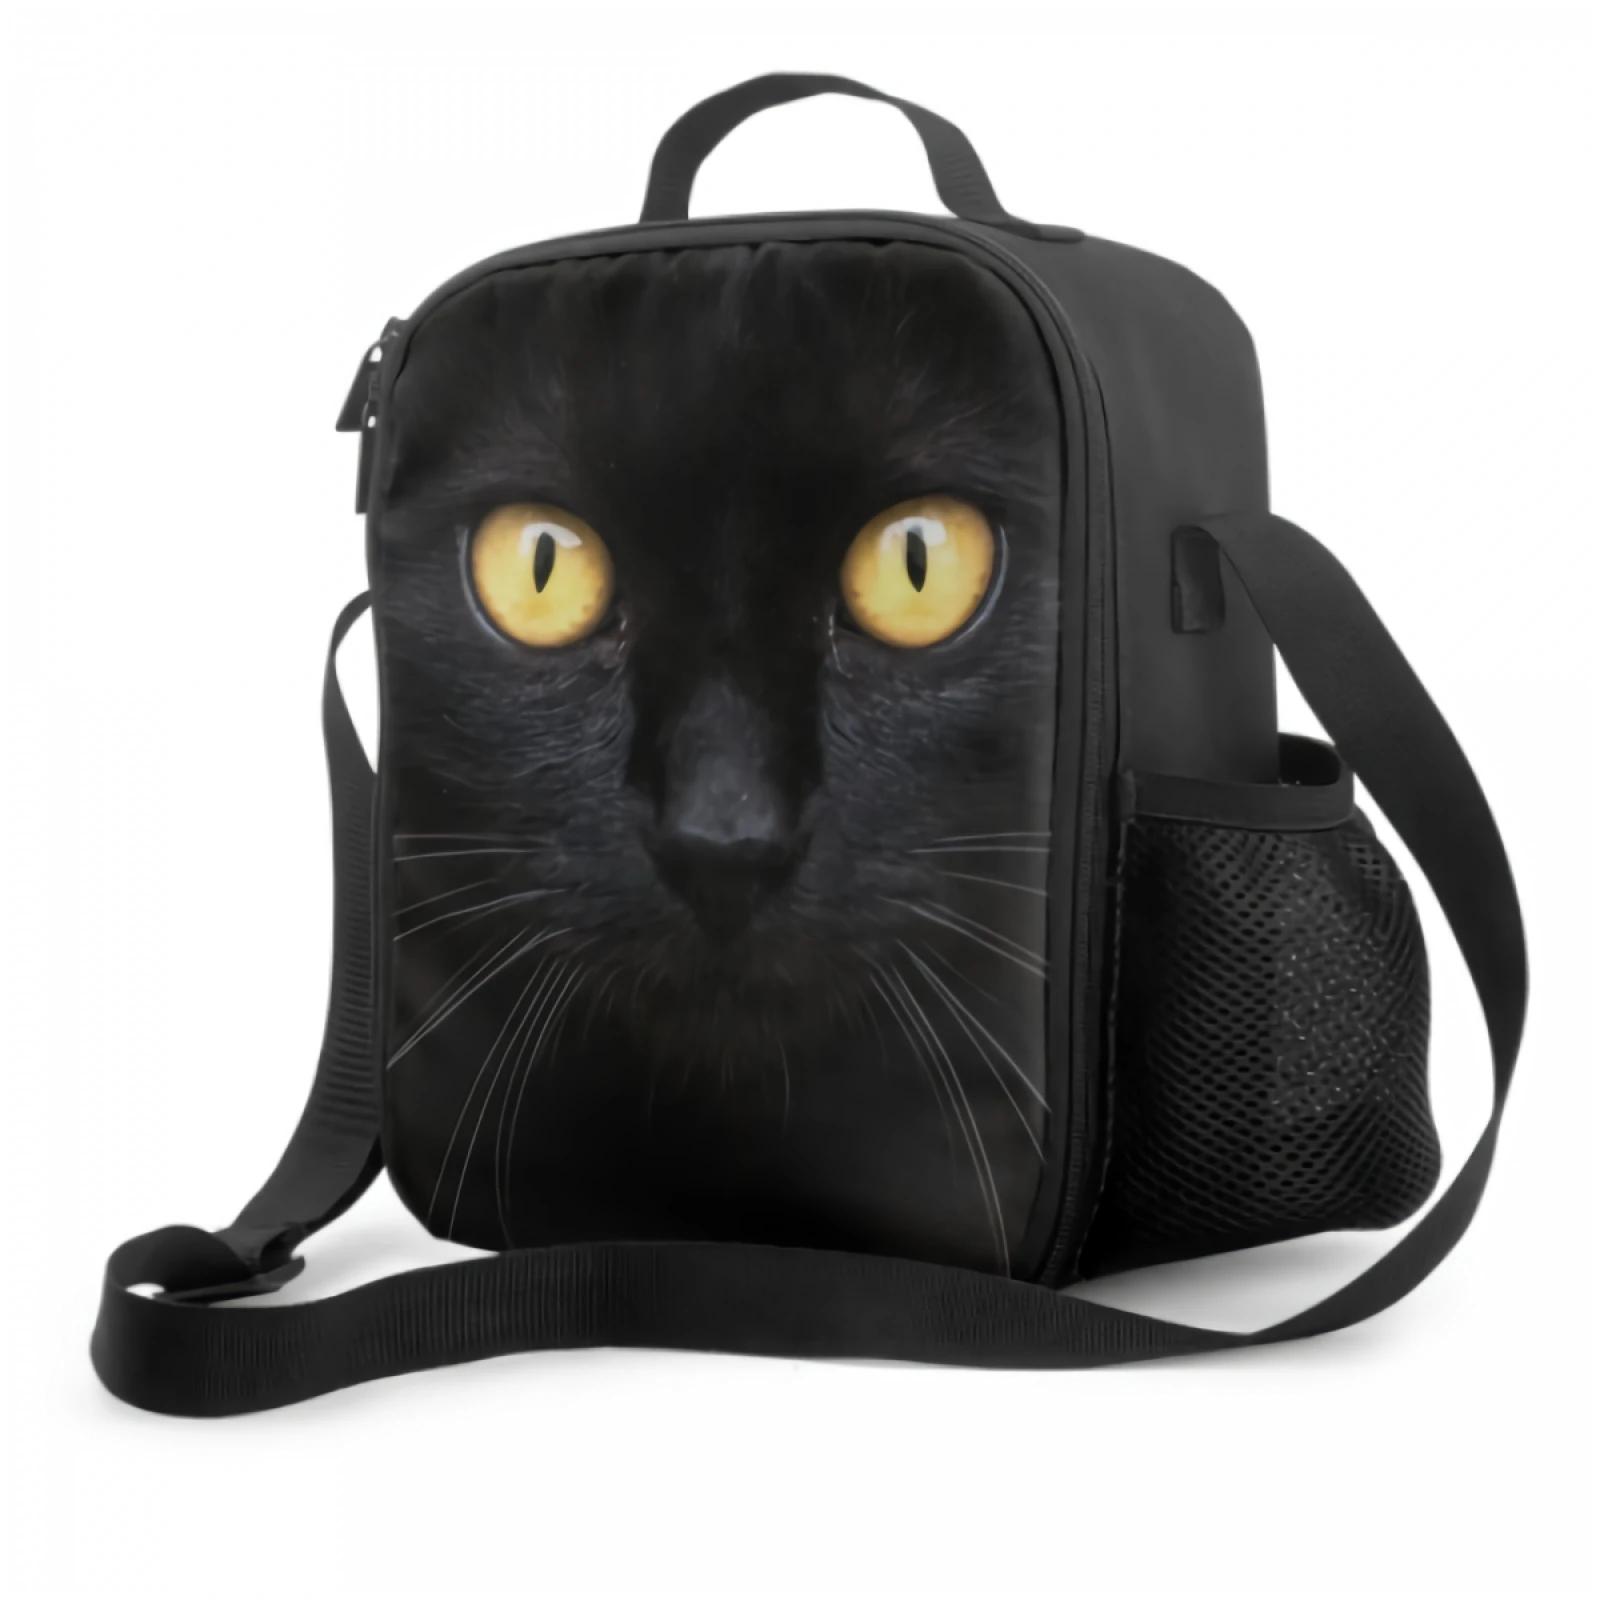 Black Cat Insulated Lunch Box Portable Lunch BagAdjustable Shoulder Strap Reusable Cooler Tote Bag for Picnic Office